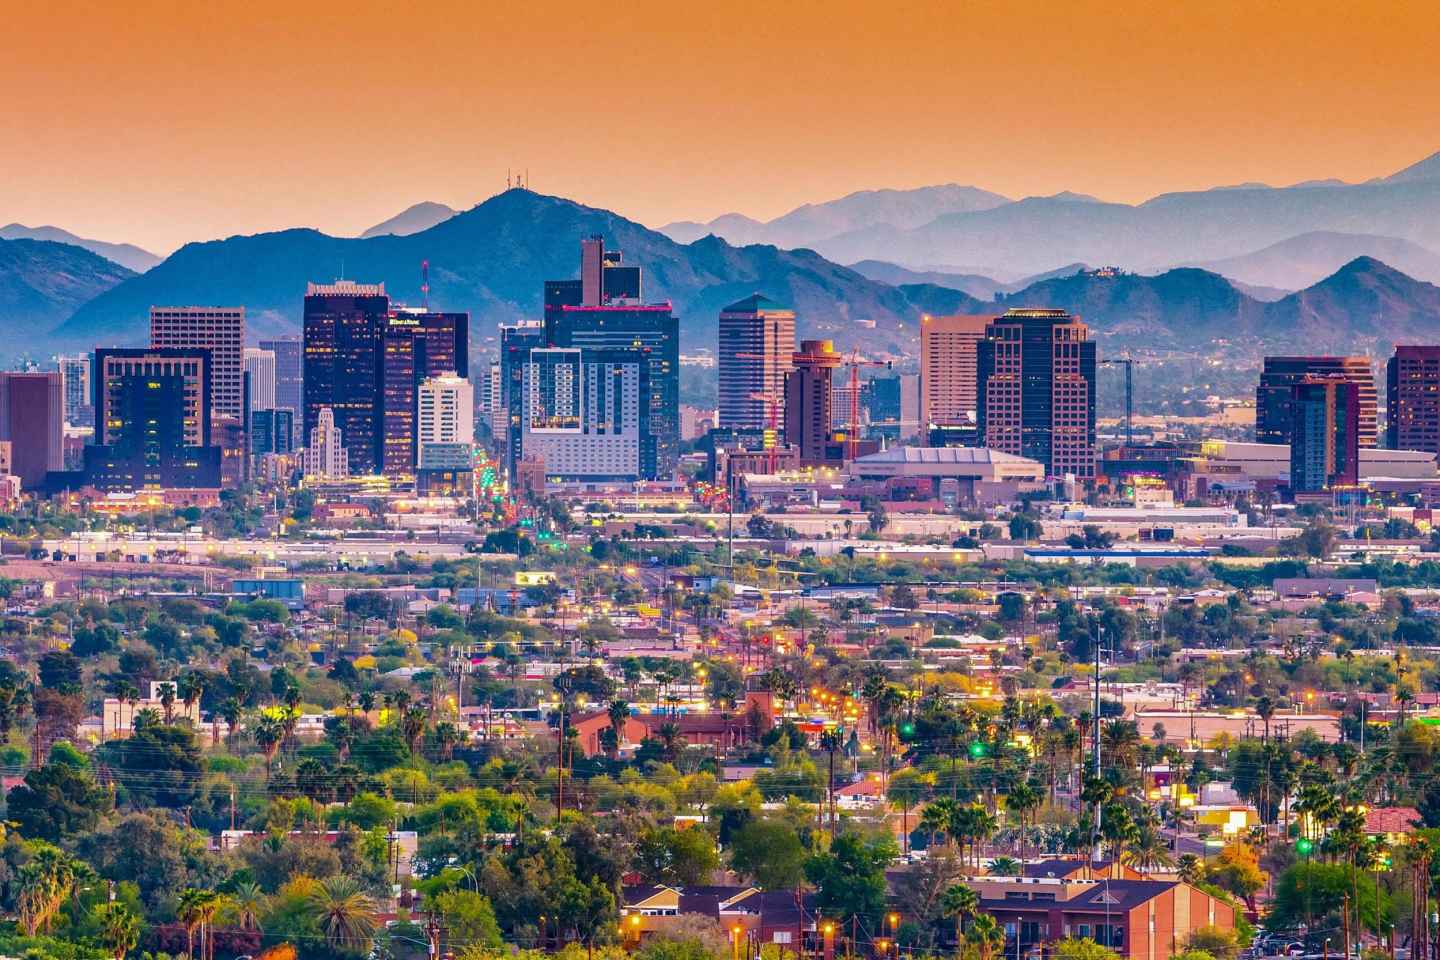 The BEST Phoenix, Arizona Tours and Things to Do in 2023 - FREE Cancellation | GetYourGuide